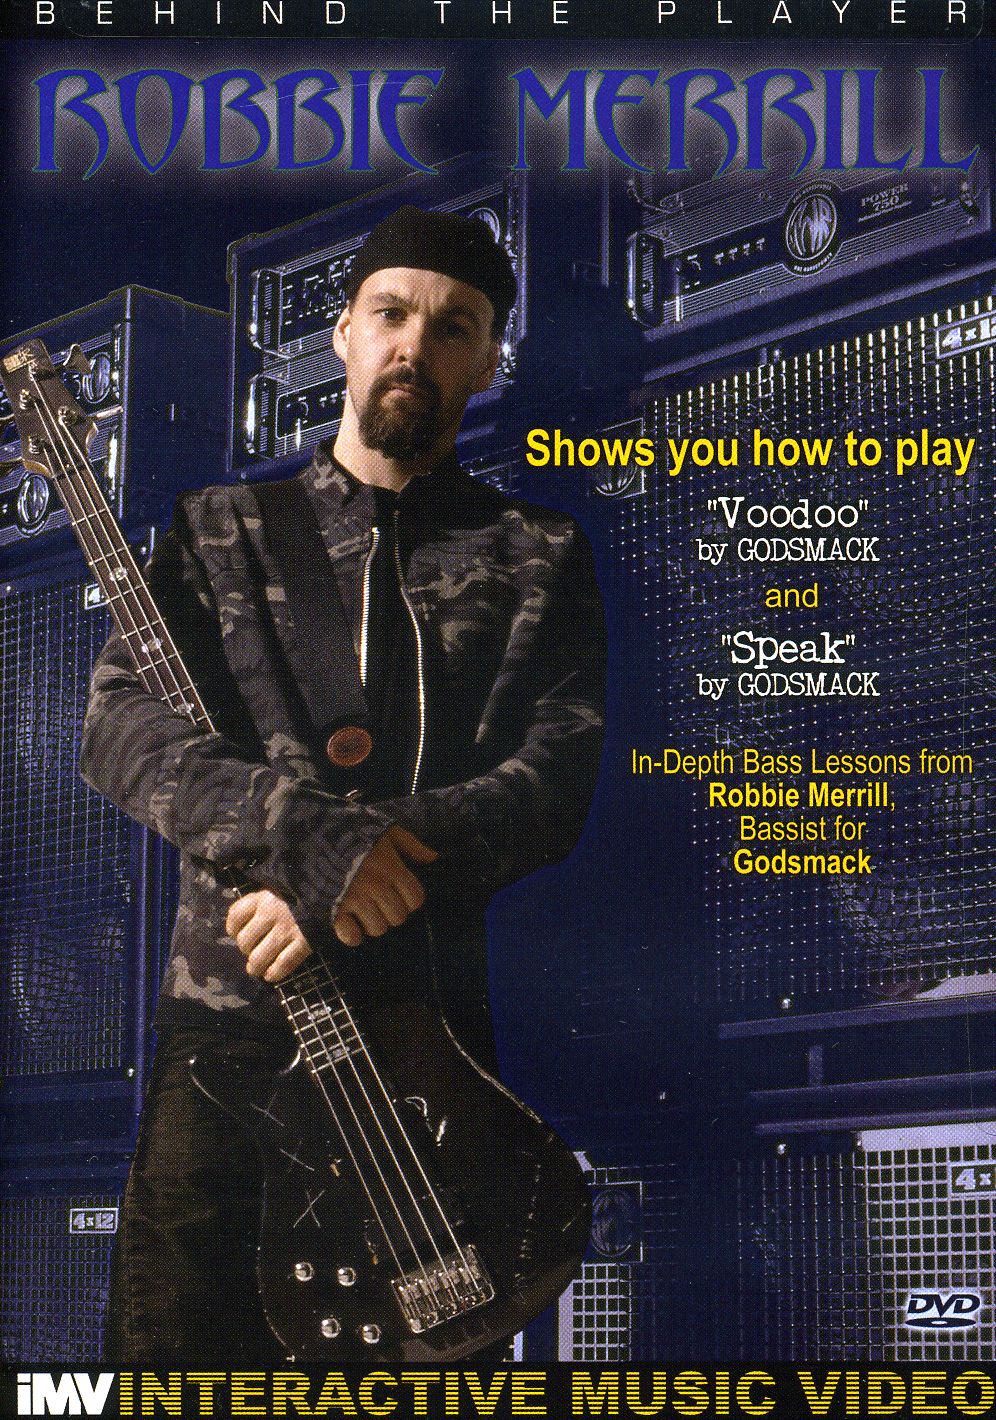 BEHIND THE PLAYER: BASS GUITAR EDITION 2